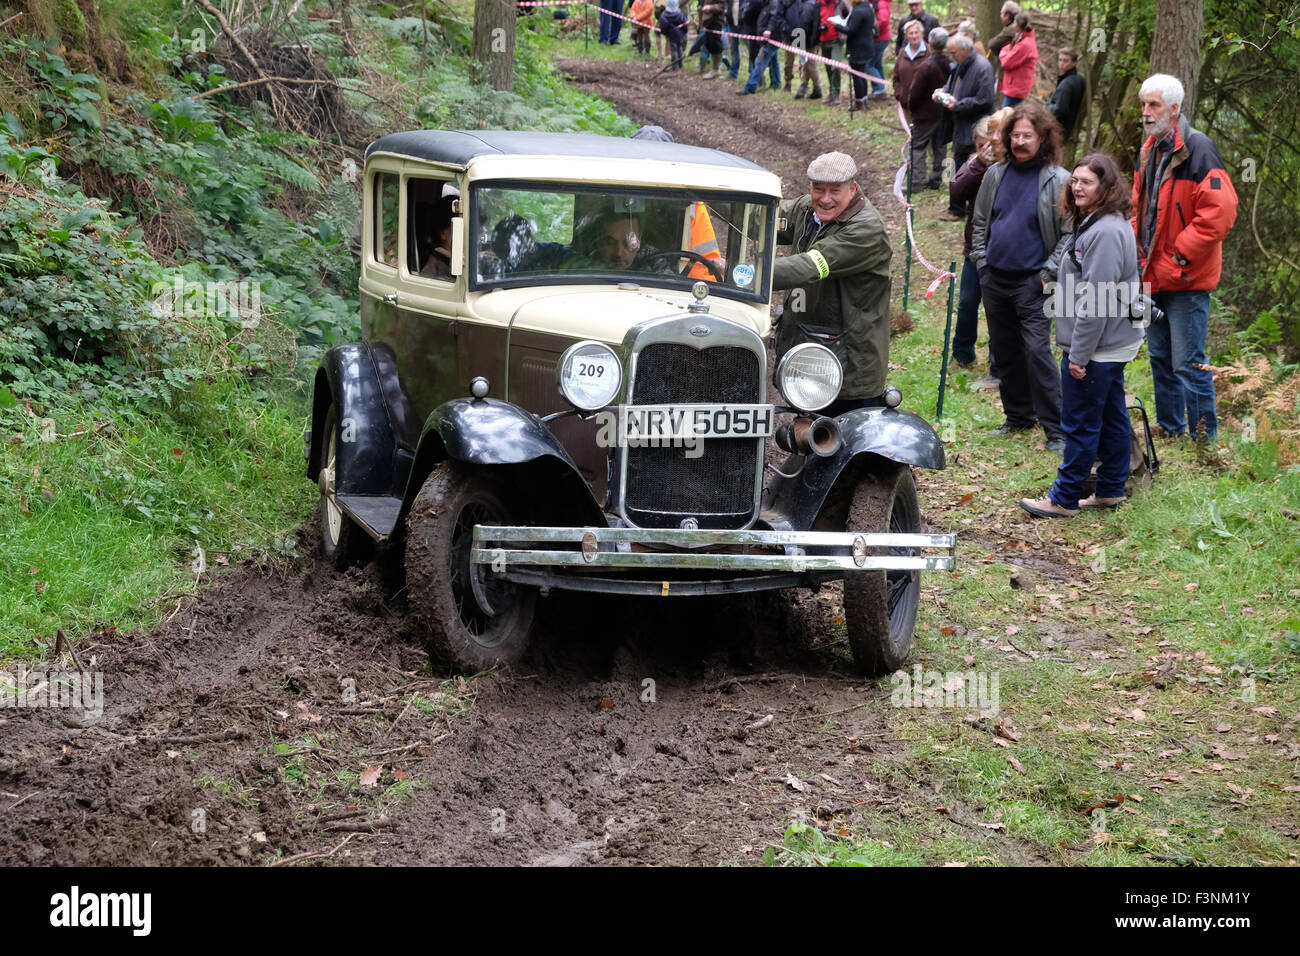 New Radnor, Powys, Wales - Saturday 10th October 2015 - The Vintage Sports Car Club ( VSSC ) hill climb trial challenge on The Smatcher a steep wooded hill just outside New Radnor. This Welsh Trial has been running since 1939. Competitors score points the further they drive up the steep hill with 25 points being awarded for reaching the top. The passenger act as 'bouncer' who bounces to help the car grip on the steep sections. Shown here is a 1930 Ford Model 'A' struggling on the muddy climb. Stock Photo